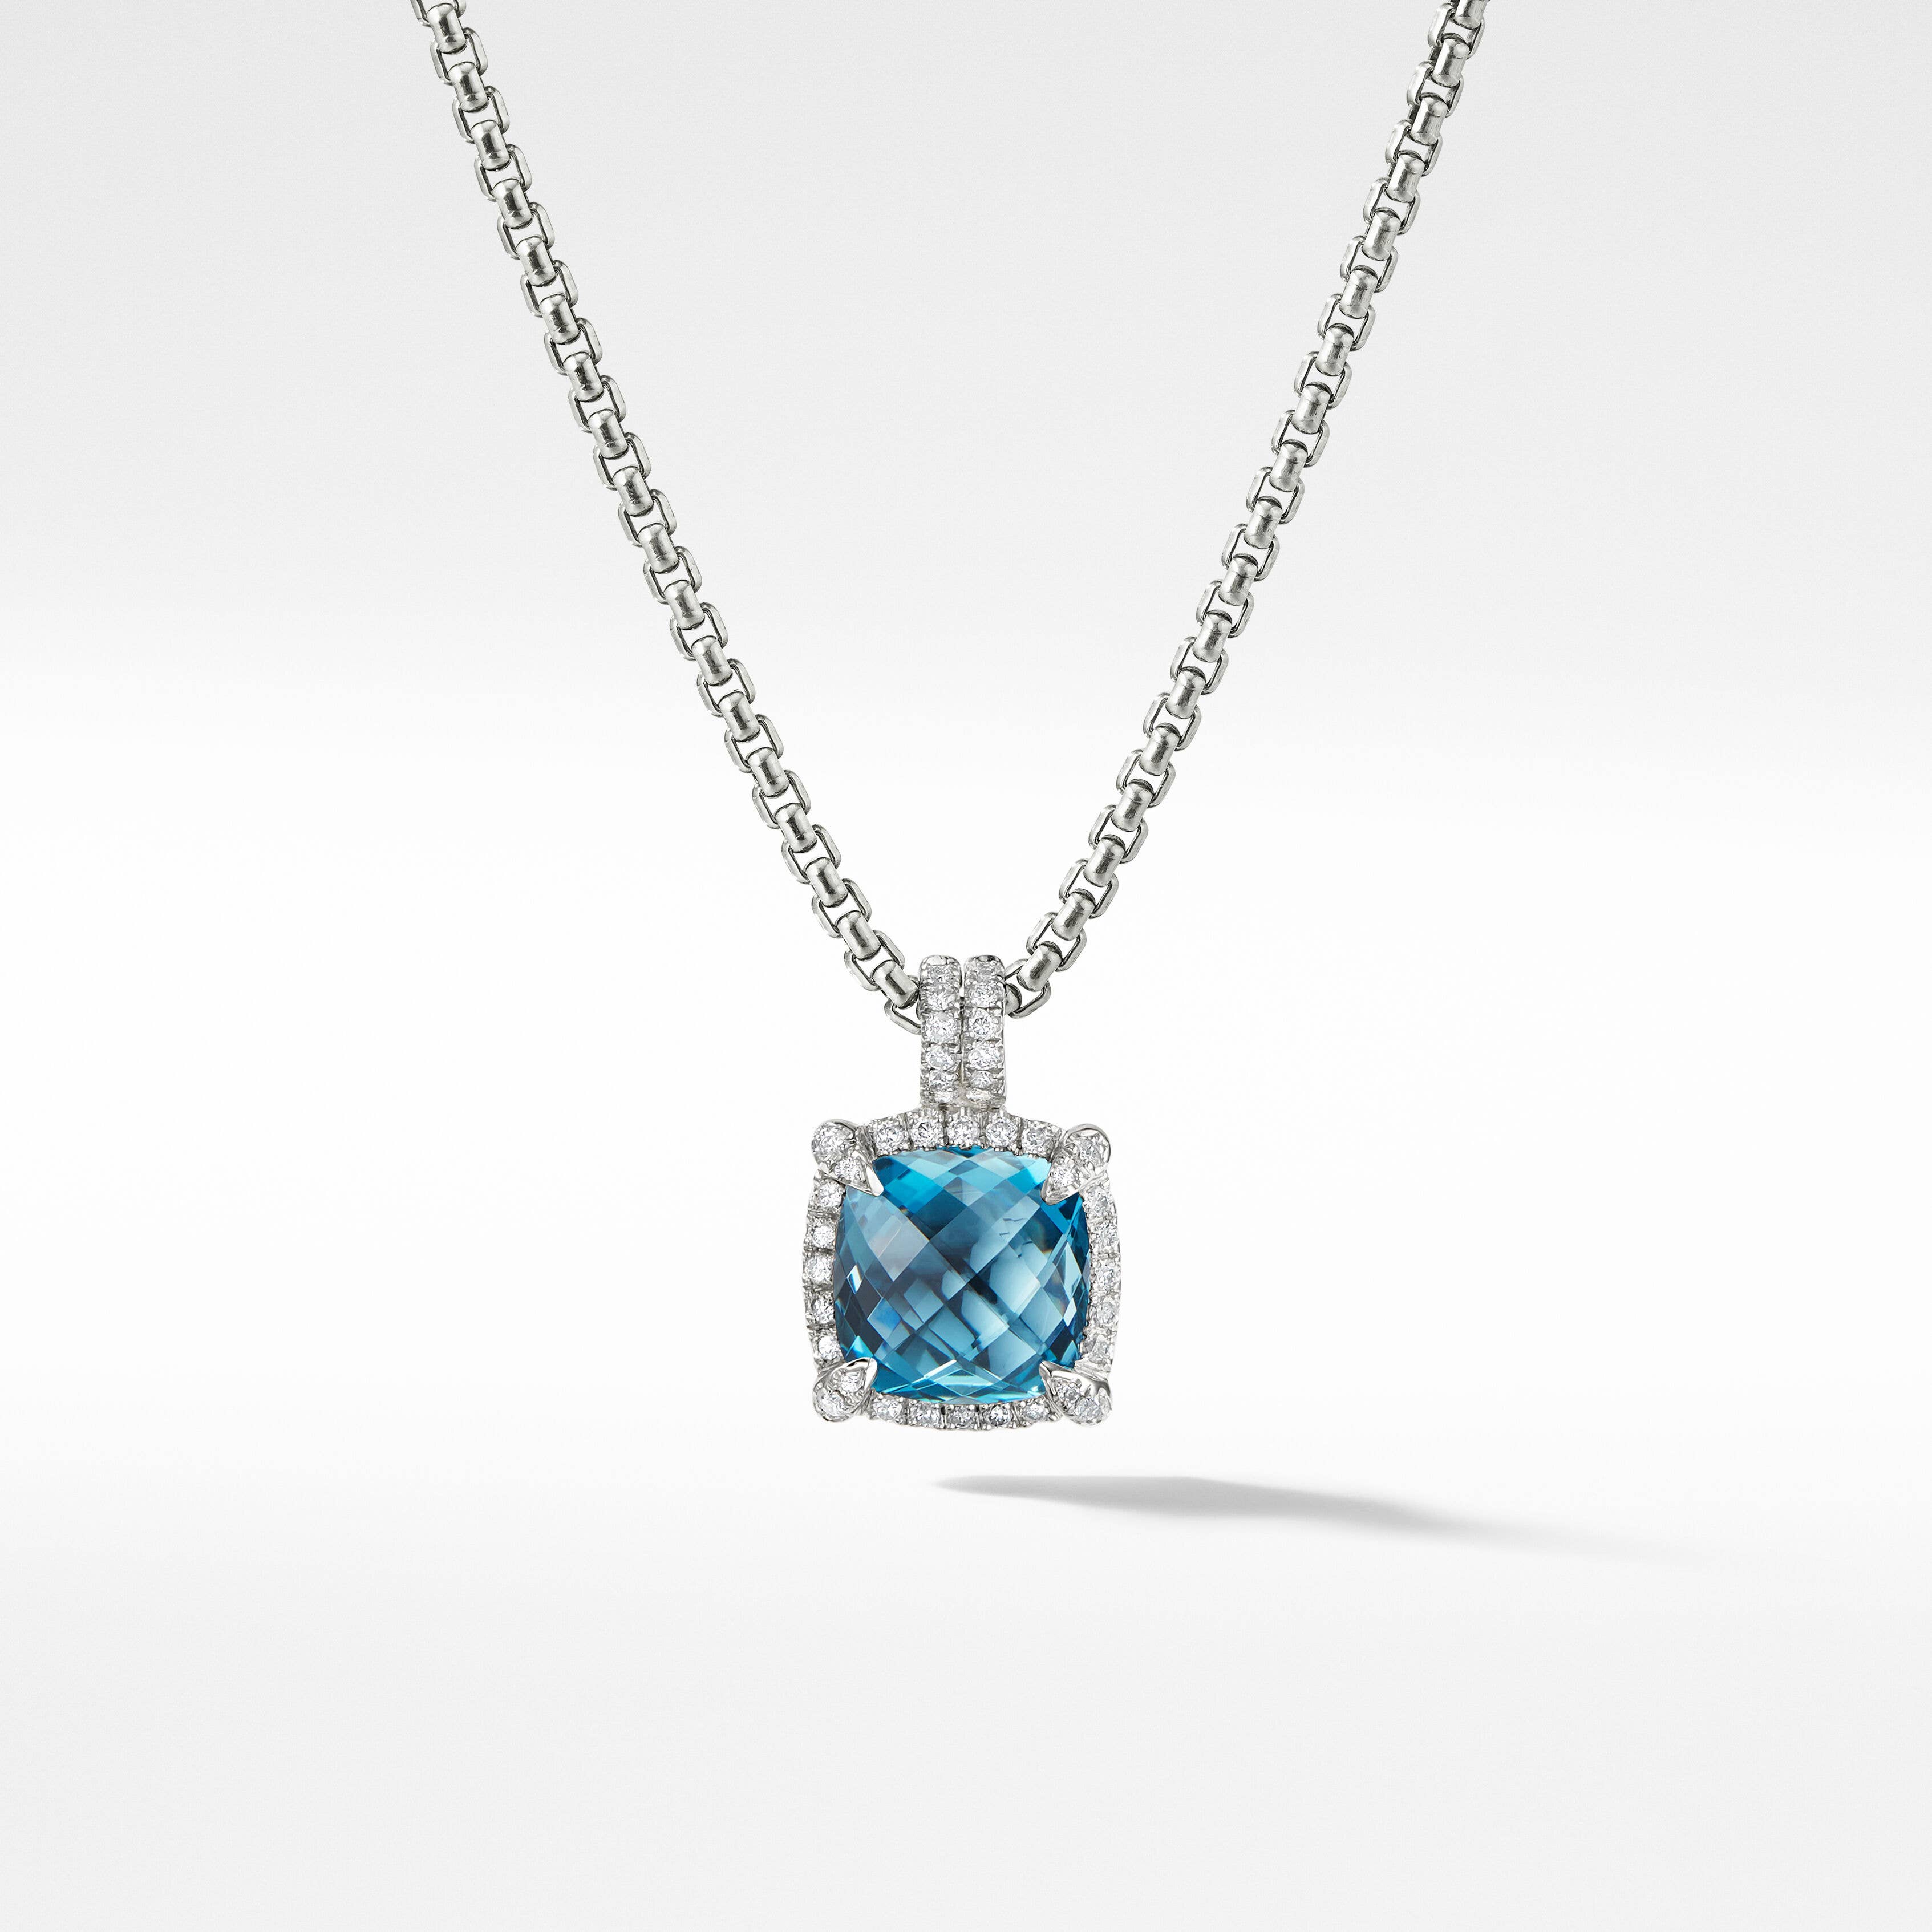 Chatelaine® Pavé Bezel Pendant Necklace in Sterling Silver with Hampton Blue Topaz and Diamonds